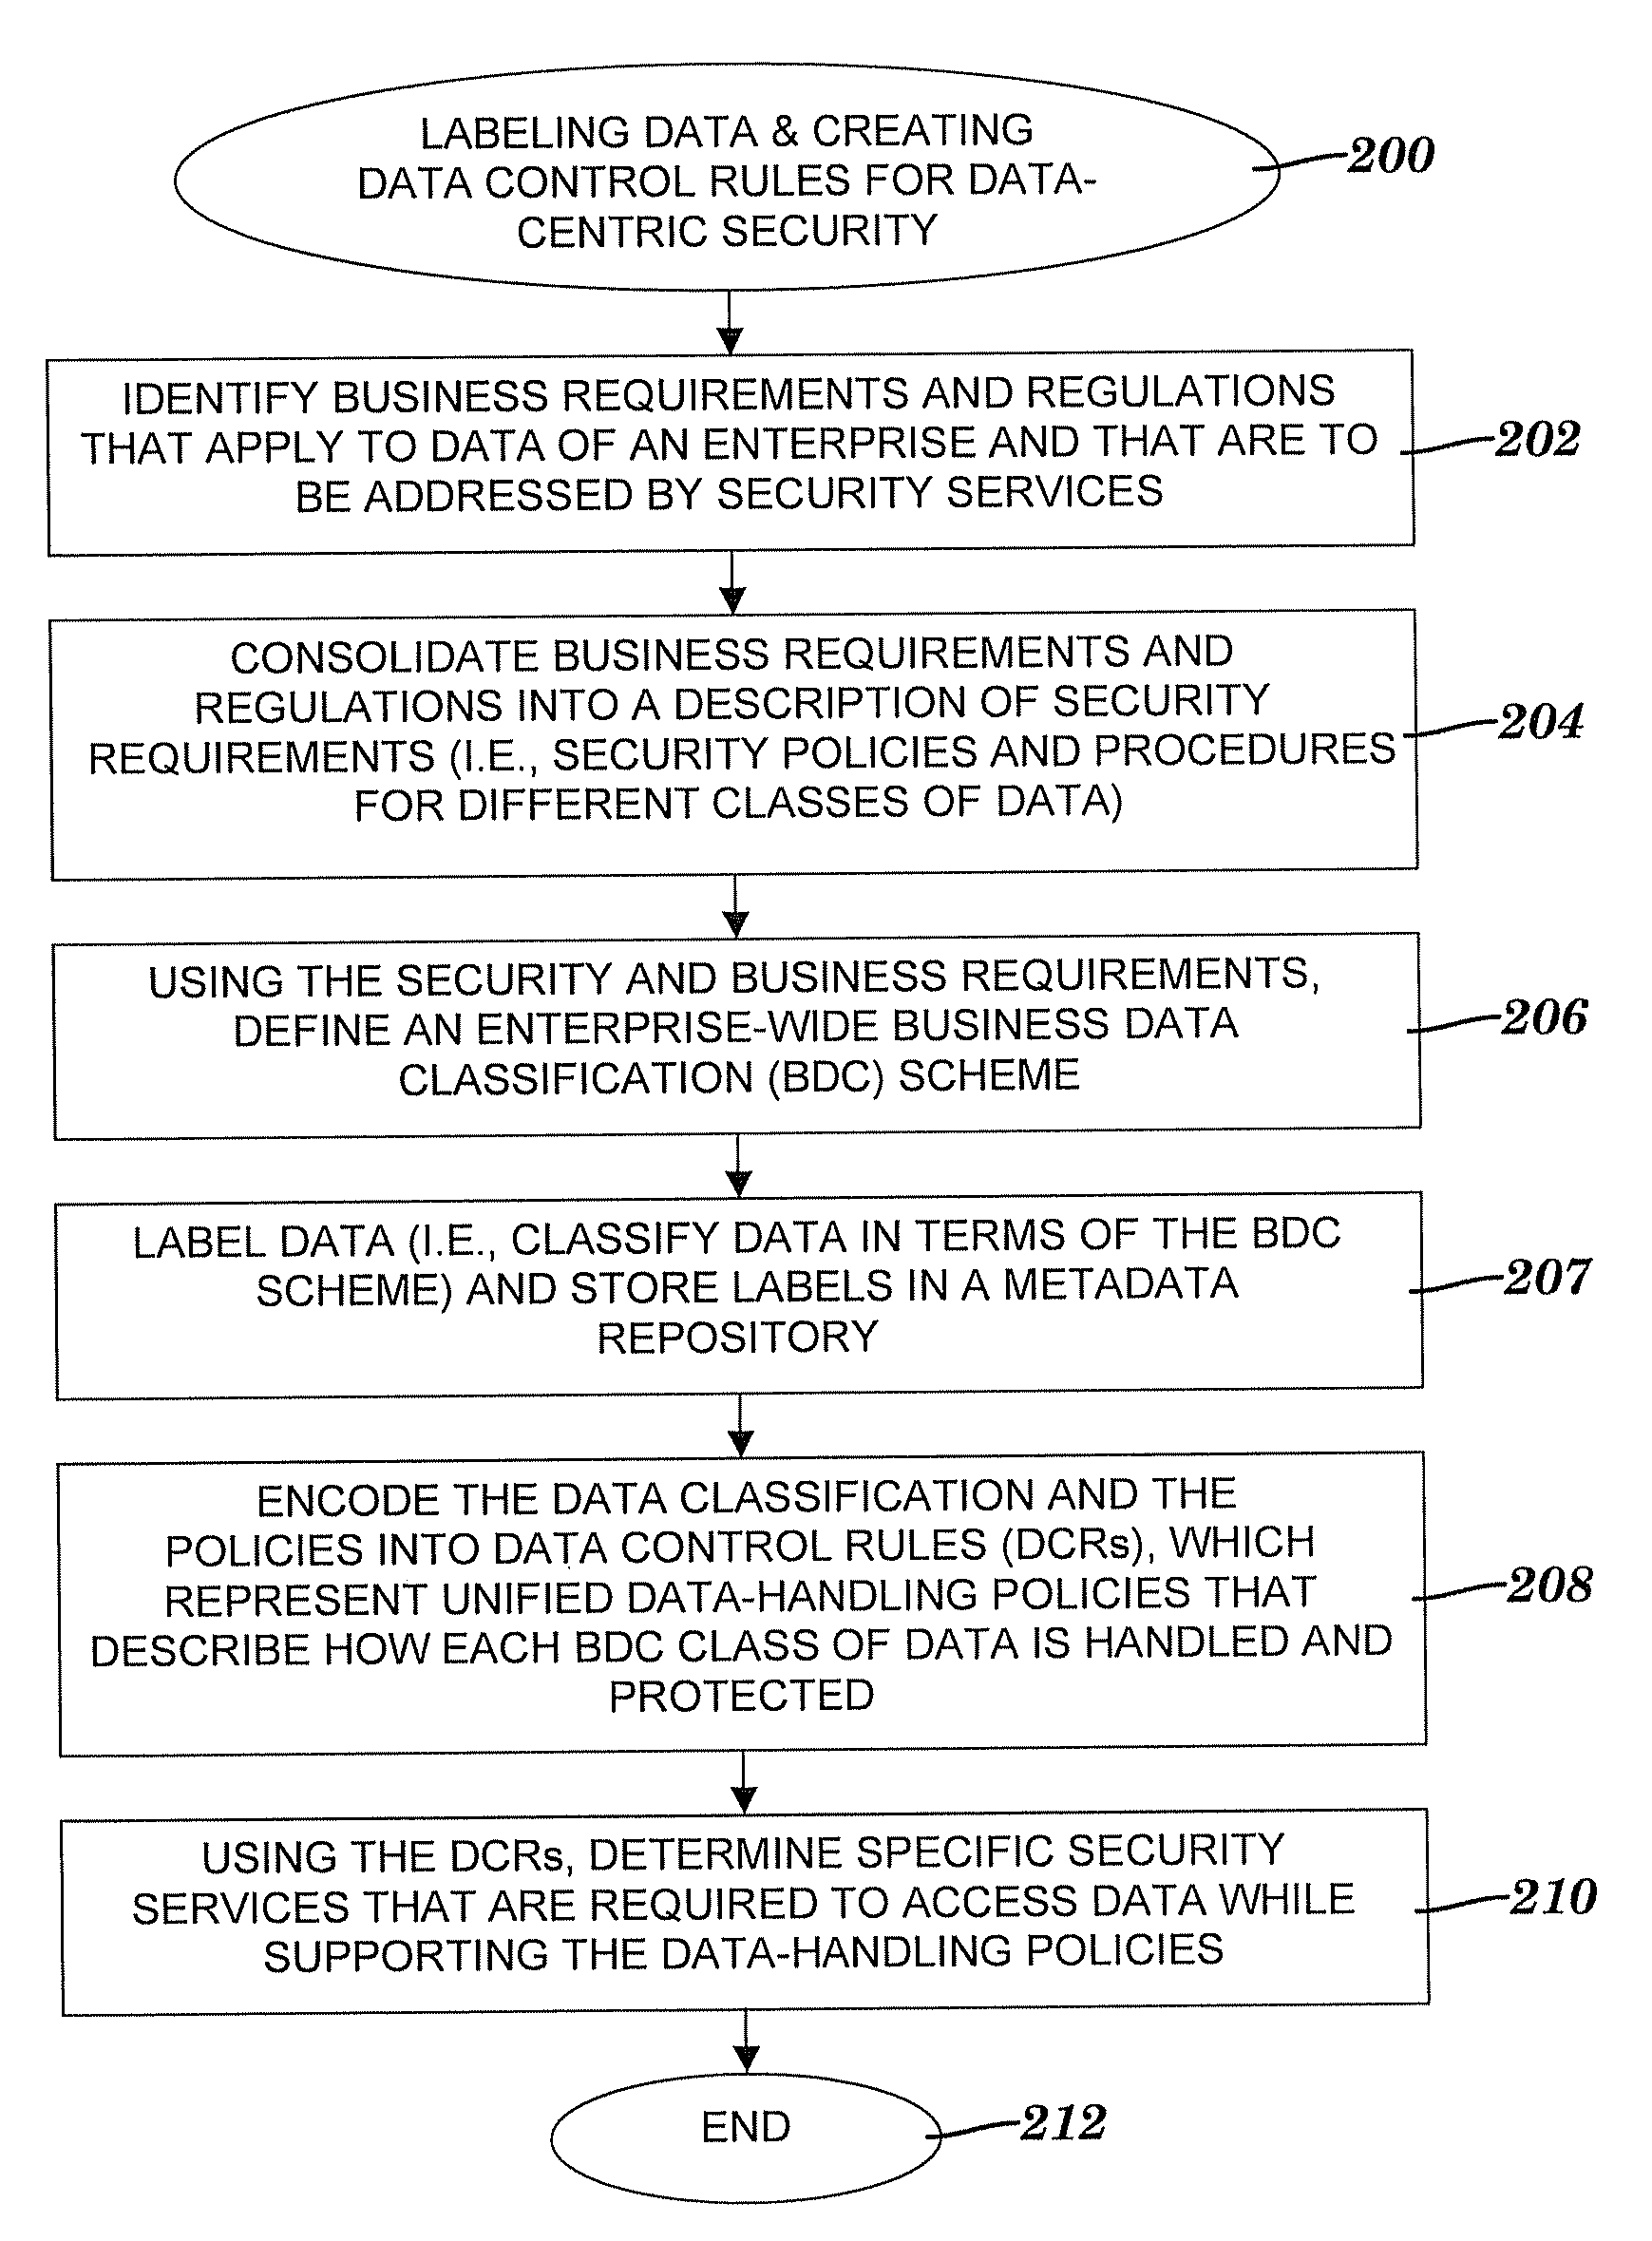 Method and system for controlling access to data via a data-centric security model